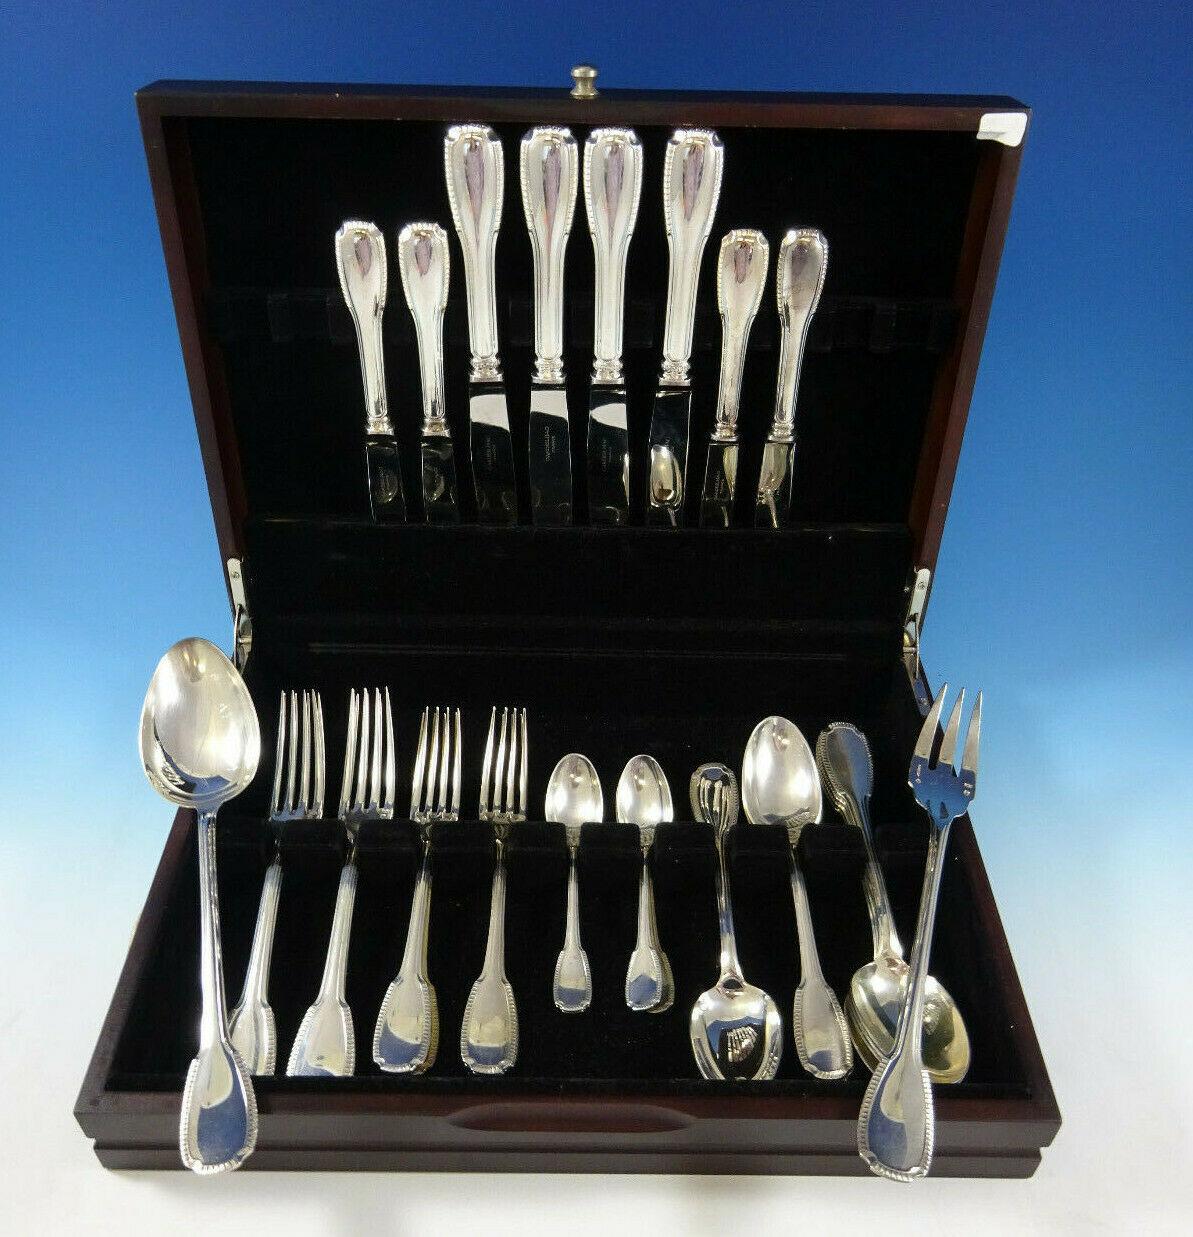 Godrons by Cardeilhac sterling silver French flatware set - 30 pieces. This set includes:

4 dinner knives, 10